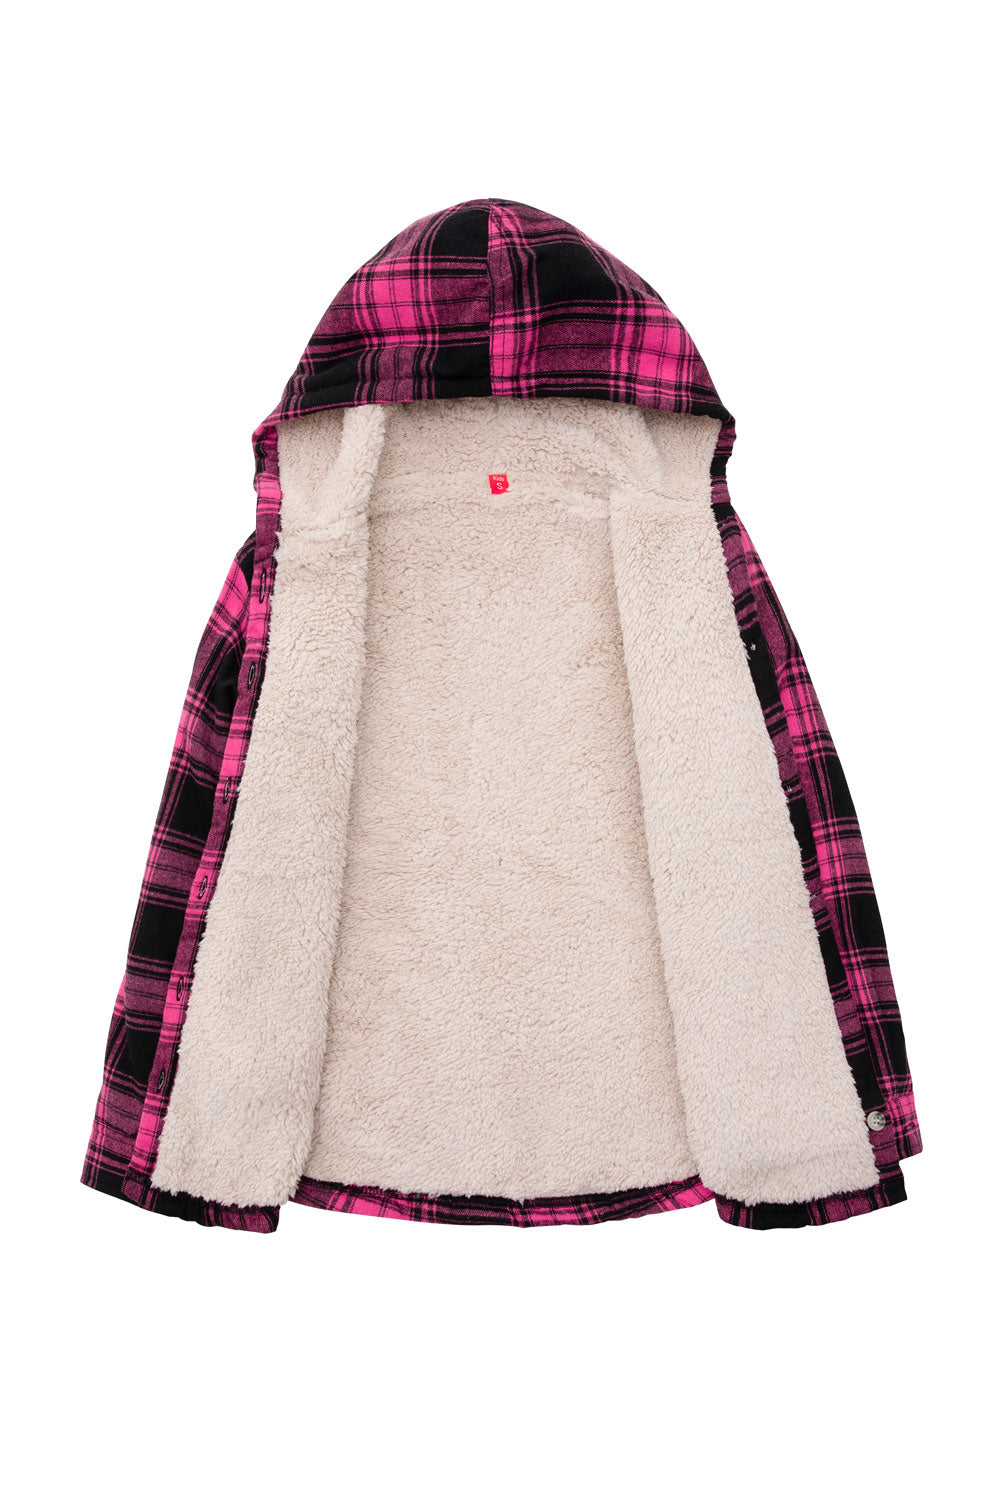 Girls Hooded Plaid Flannel Shirt Jacket,Sherpa Lined